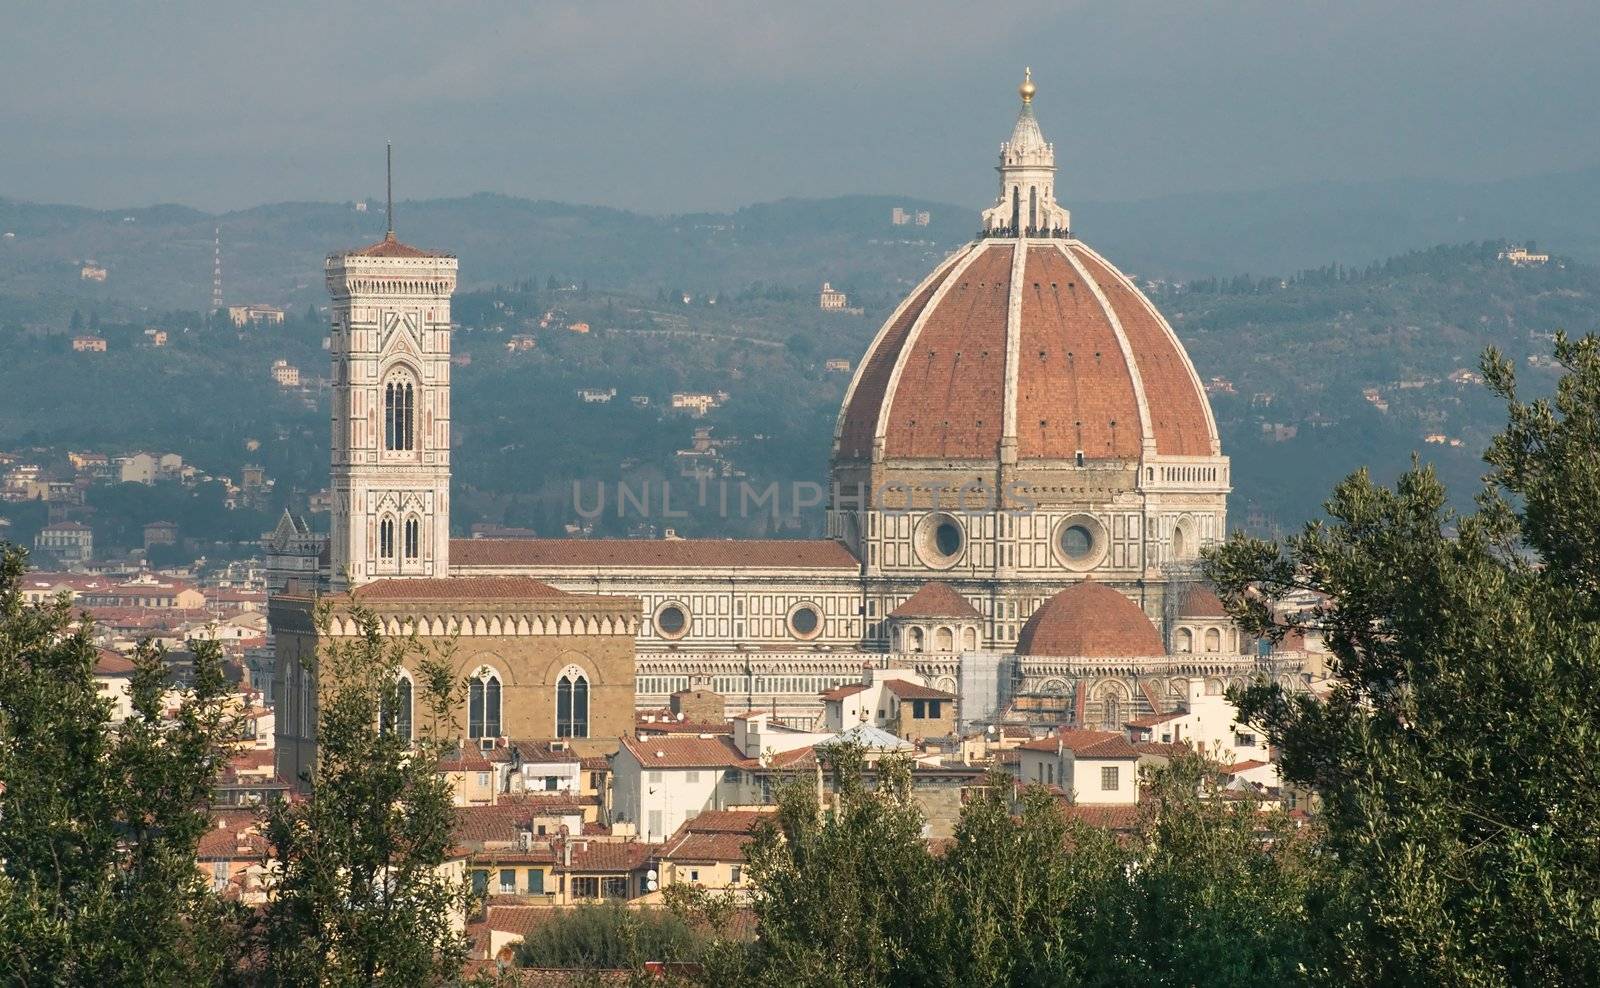 View of the Duomo in Florence from a high place